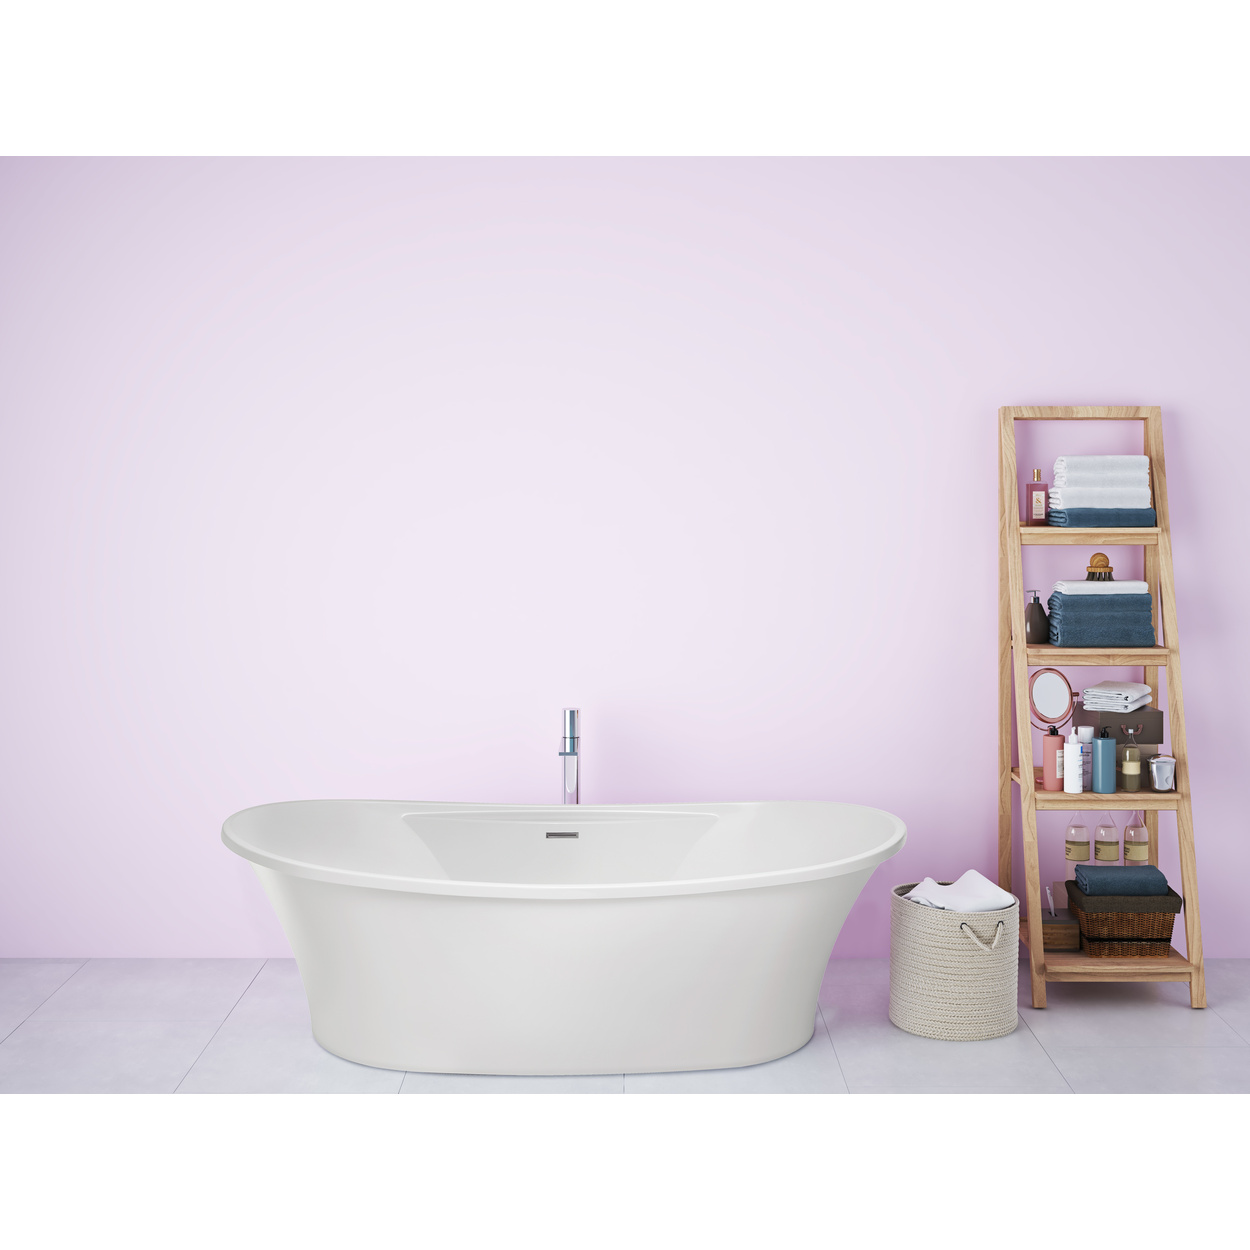 Hydro Systems Breanne 6636 Freestanding Tub SBRE6636AT